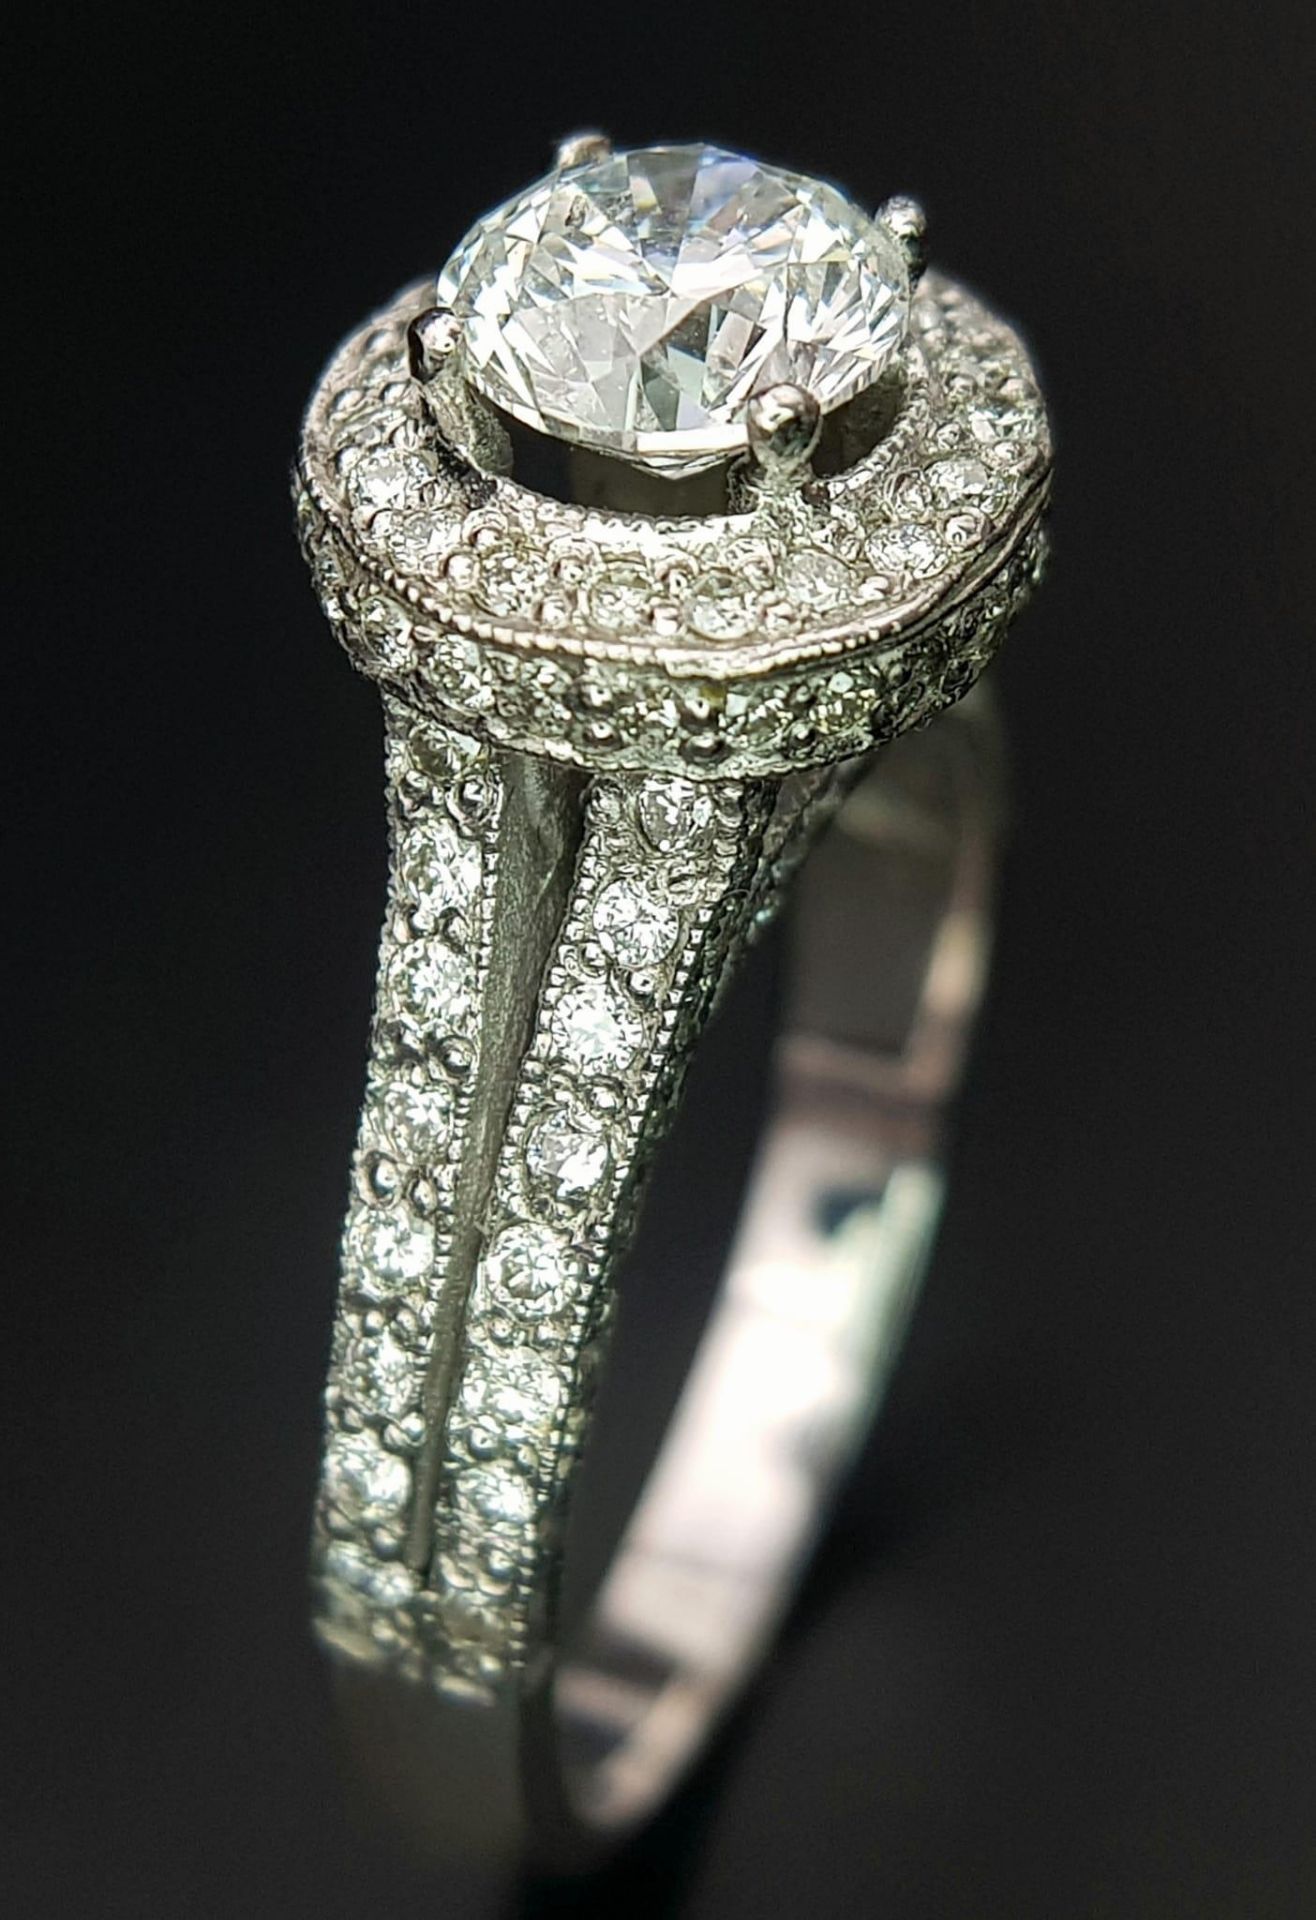 An 18 K white gold ring with a brilliant cut diamond (1.01 carats) surrounded by diamonds on the top - Image 4 of 22